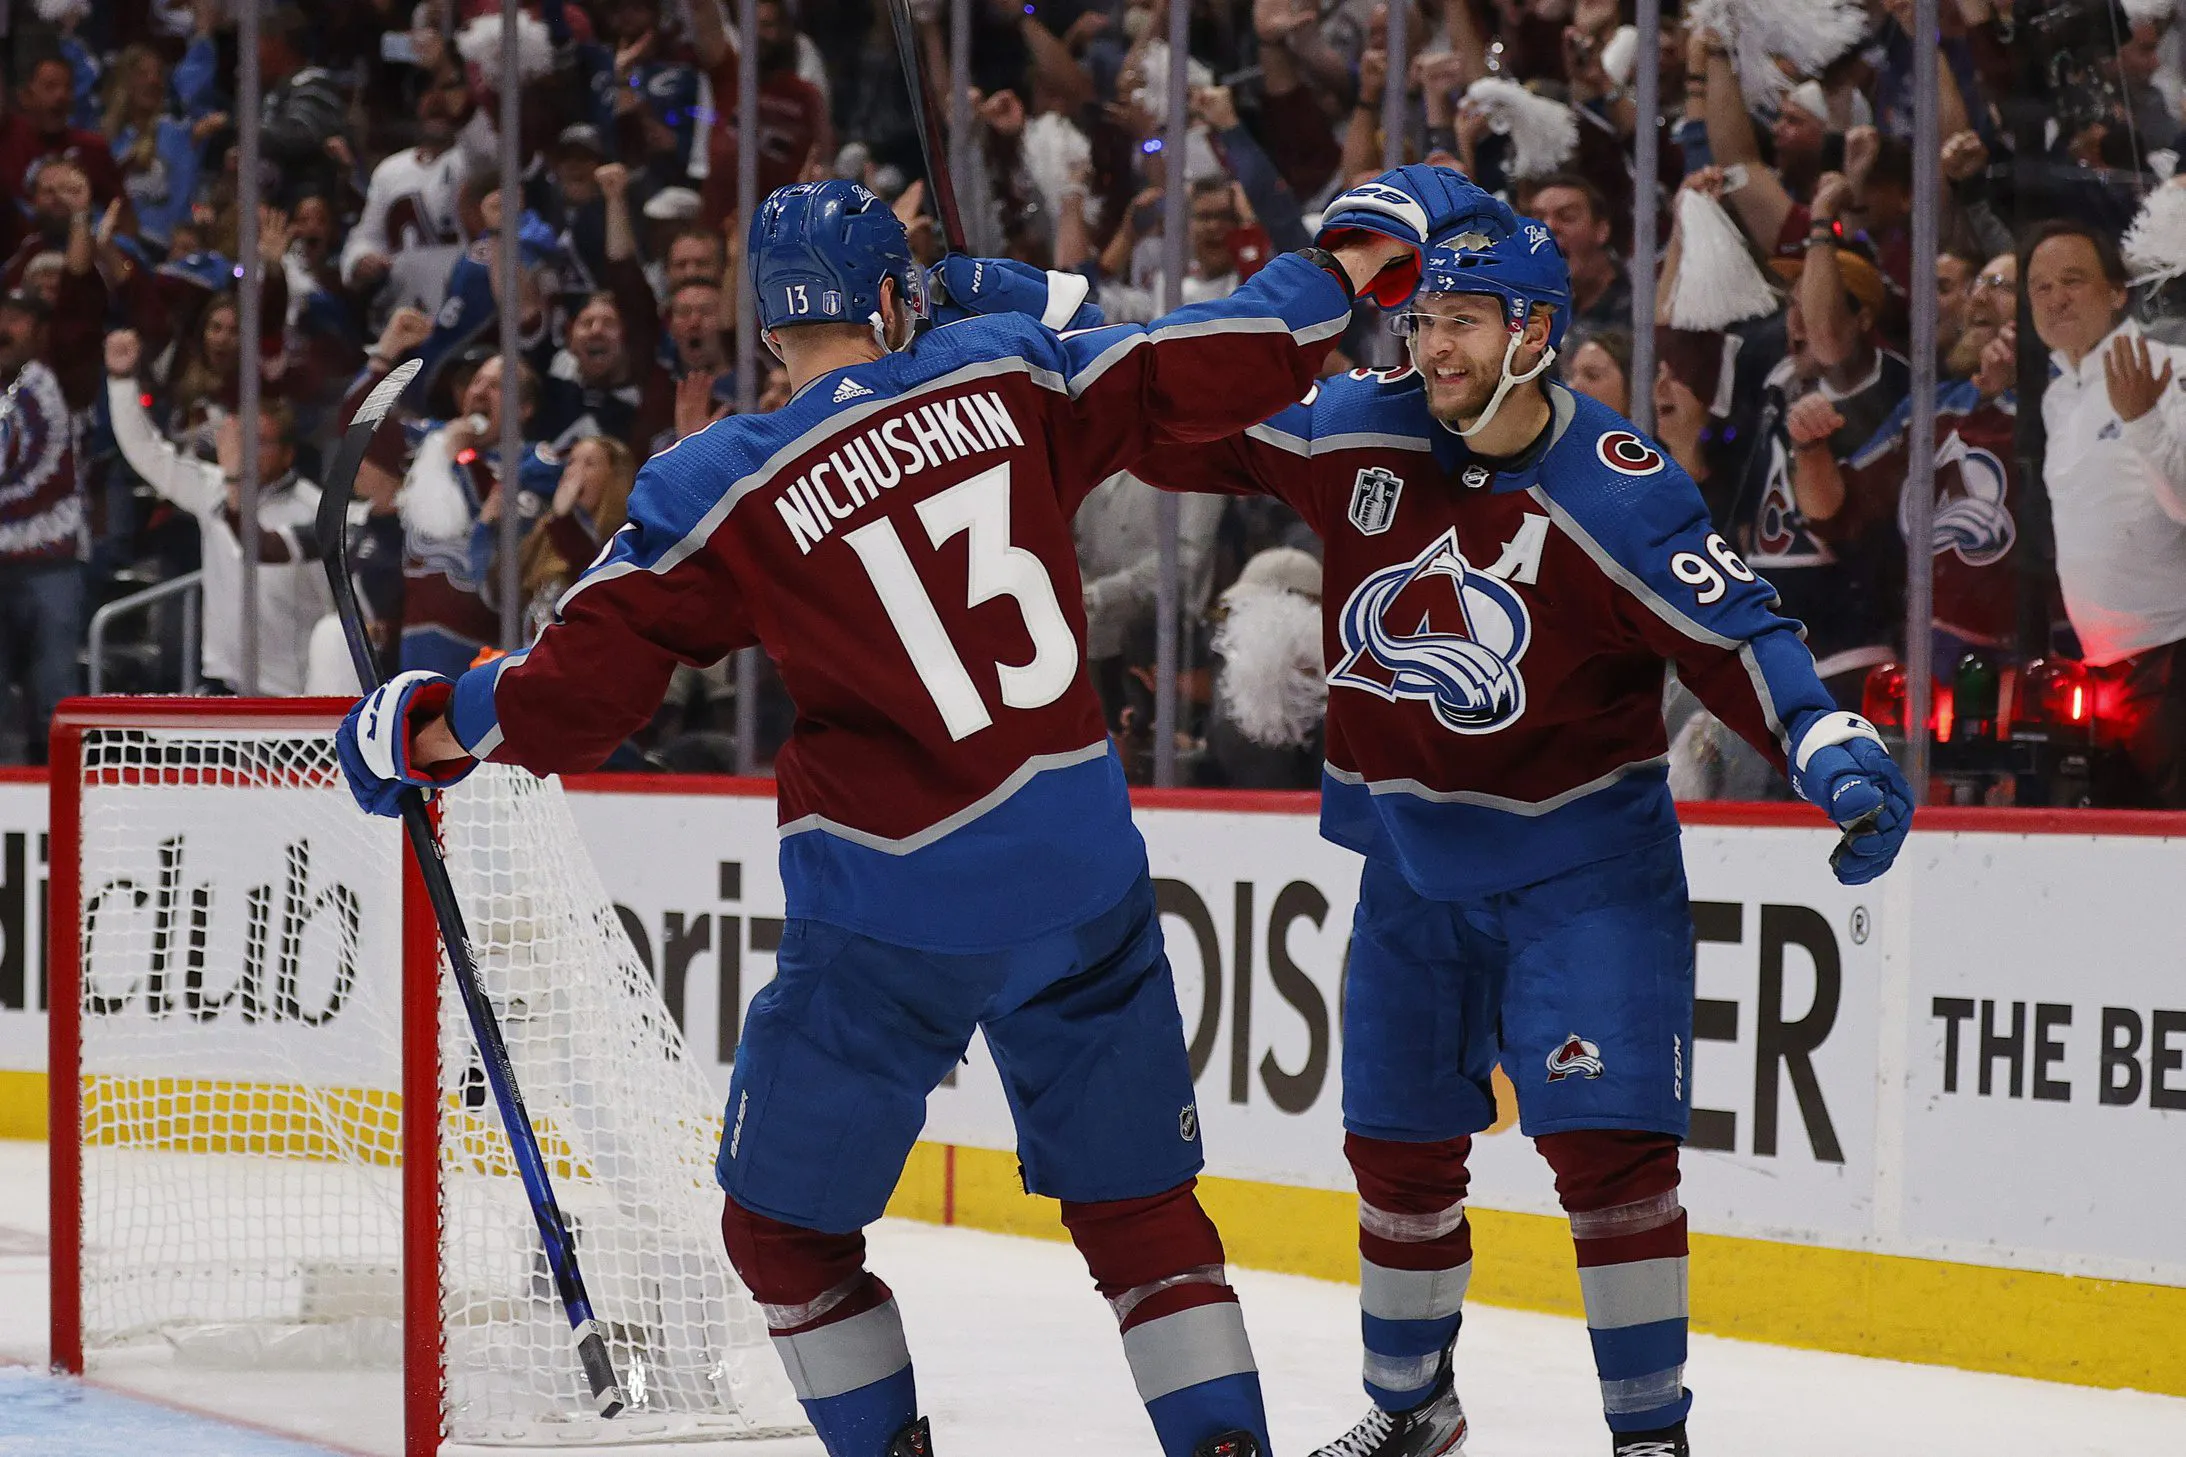 Report: Colorado Avalanche, Valeri Nichushkin agree to an eight-year contract